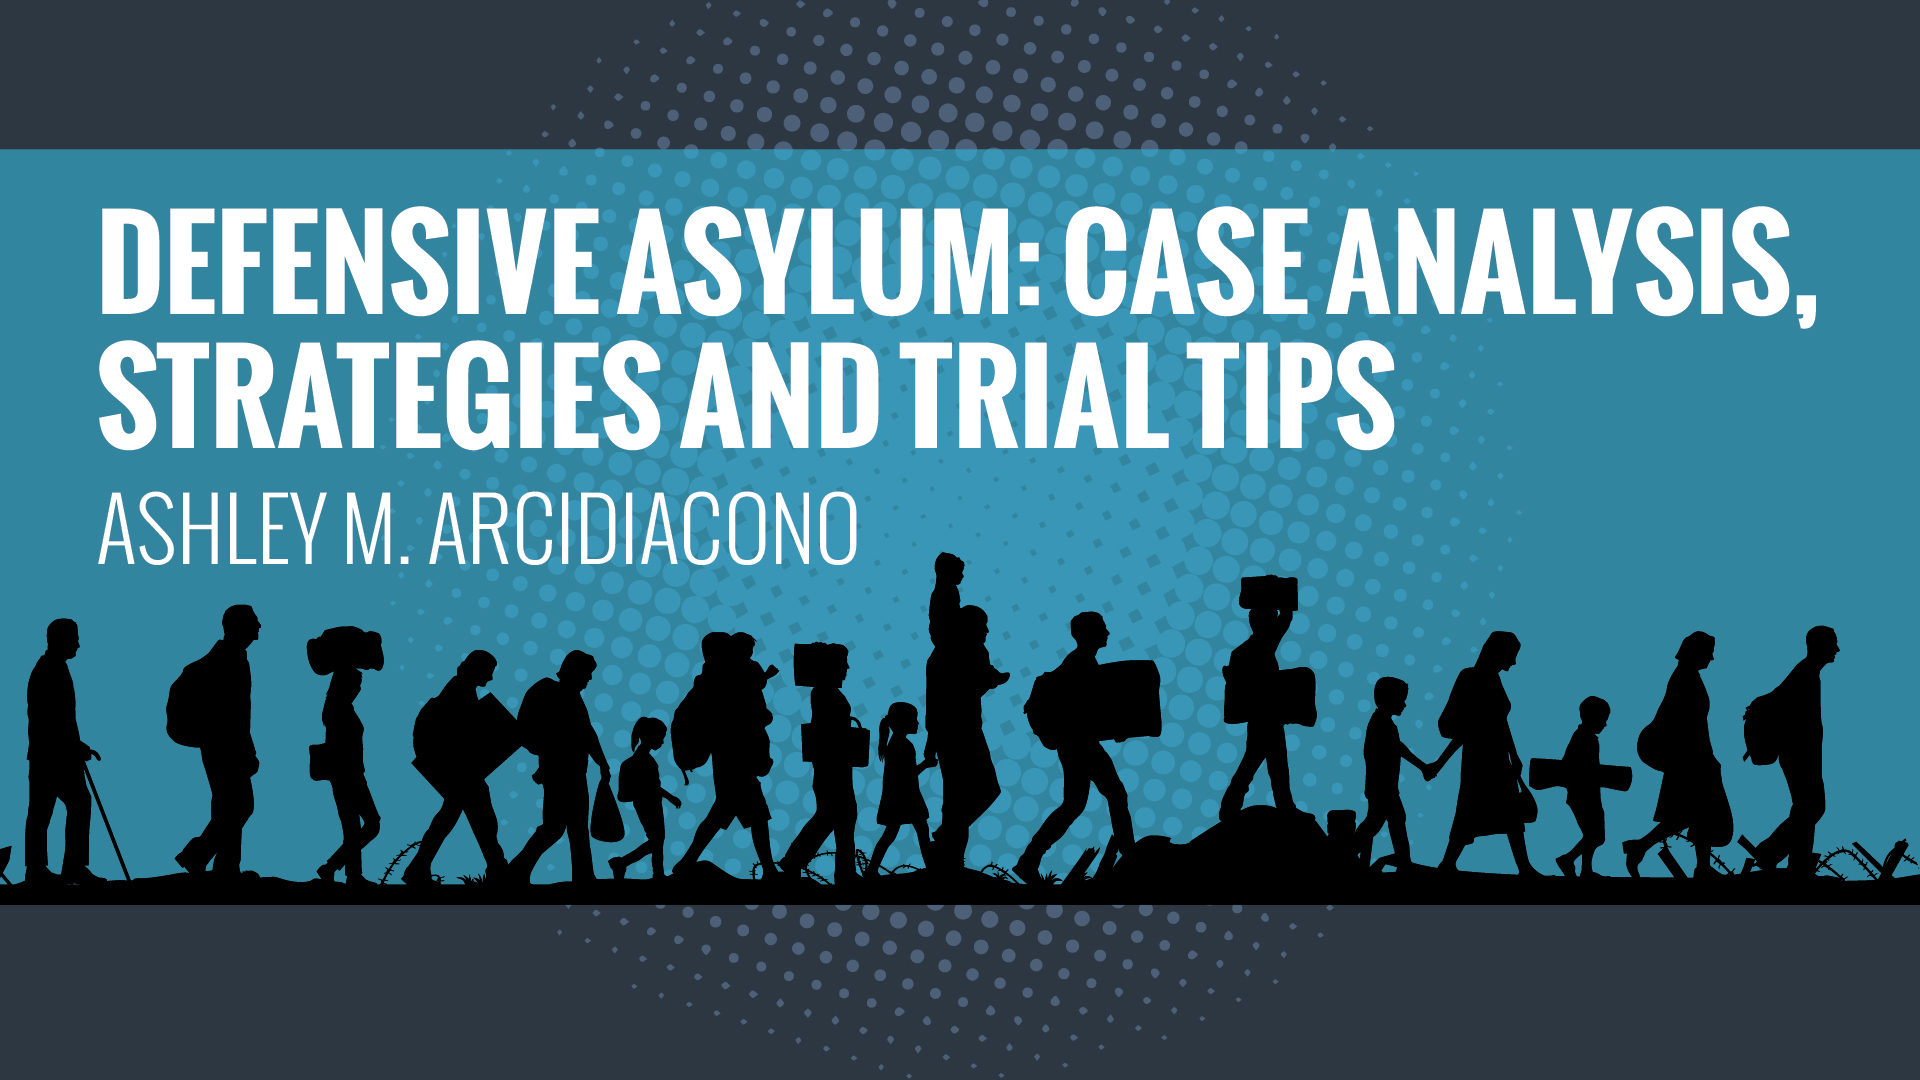 New CLE Course on Defensive Asylum Case Analysis, Strategies and Trial